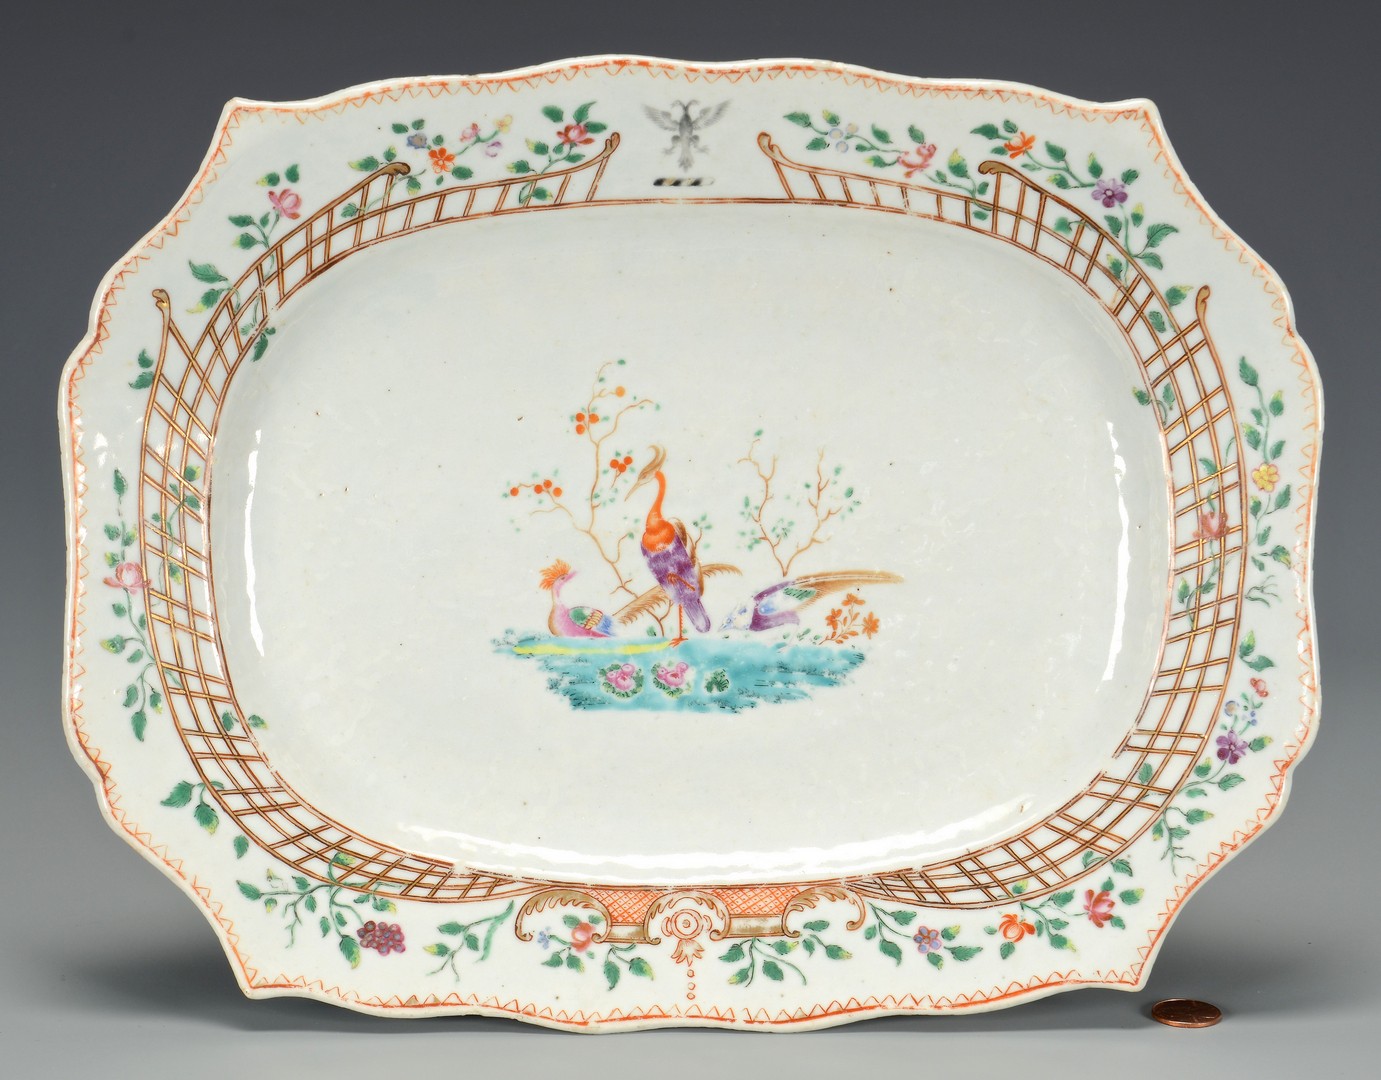 Lot 351: Chinese Export Armorial Platter